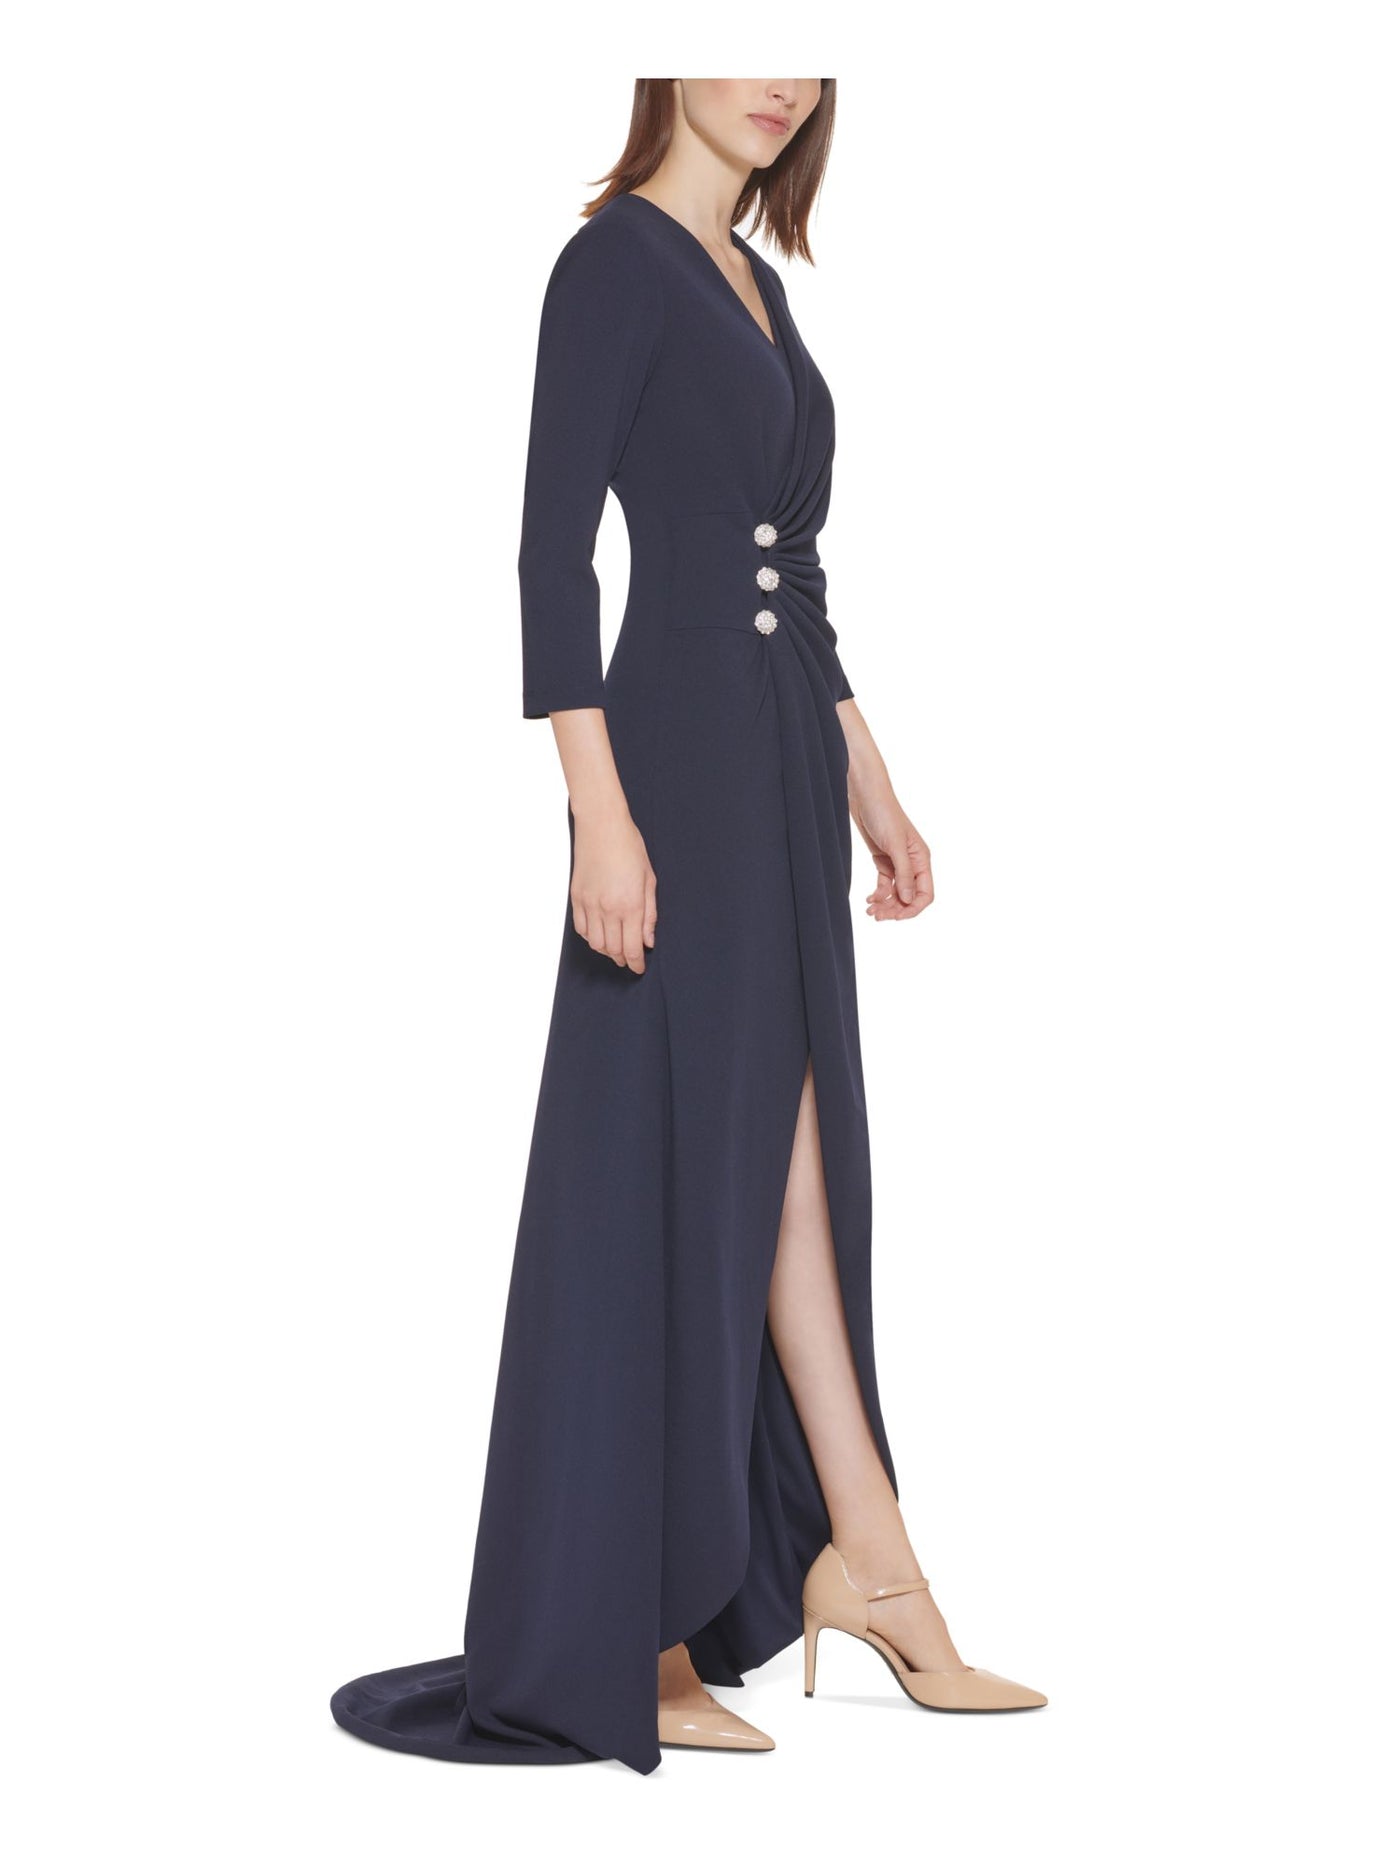 CALVIN KLEIN Womens Navy Zippered Pleated Button Detail Gown Lined 3/4 Sleeve V Neck Full-Length Formal Faux Wrap Dress 6